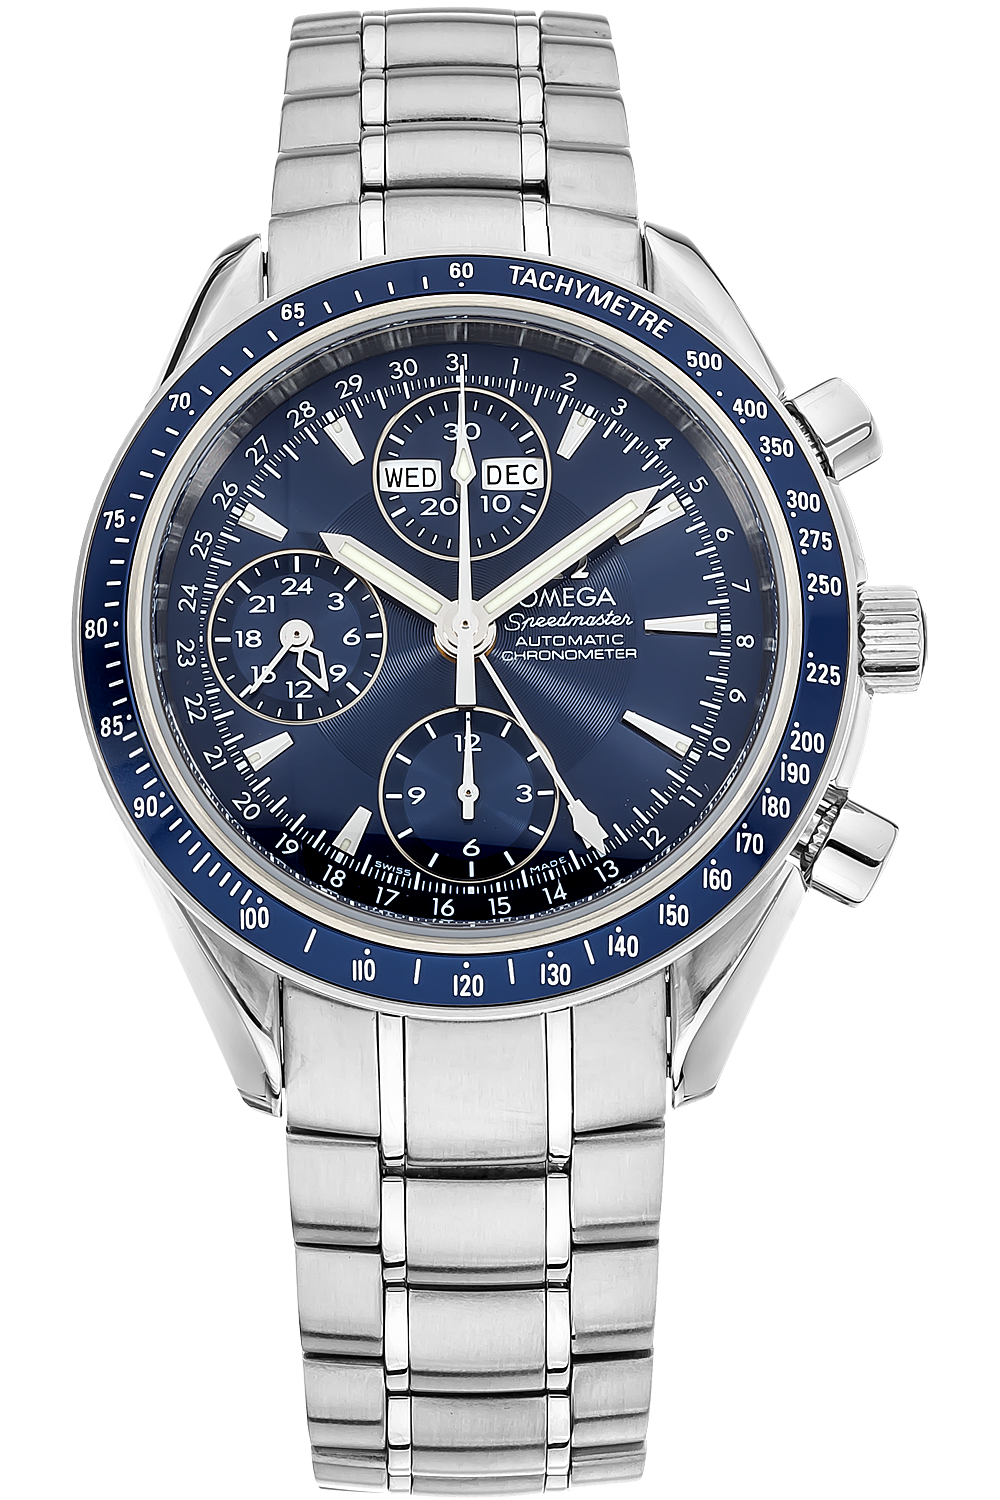 Pre-Owned Omega Speedmaster Day-Date Chronograph Automatic (3222.80.00)